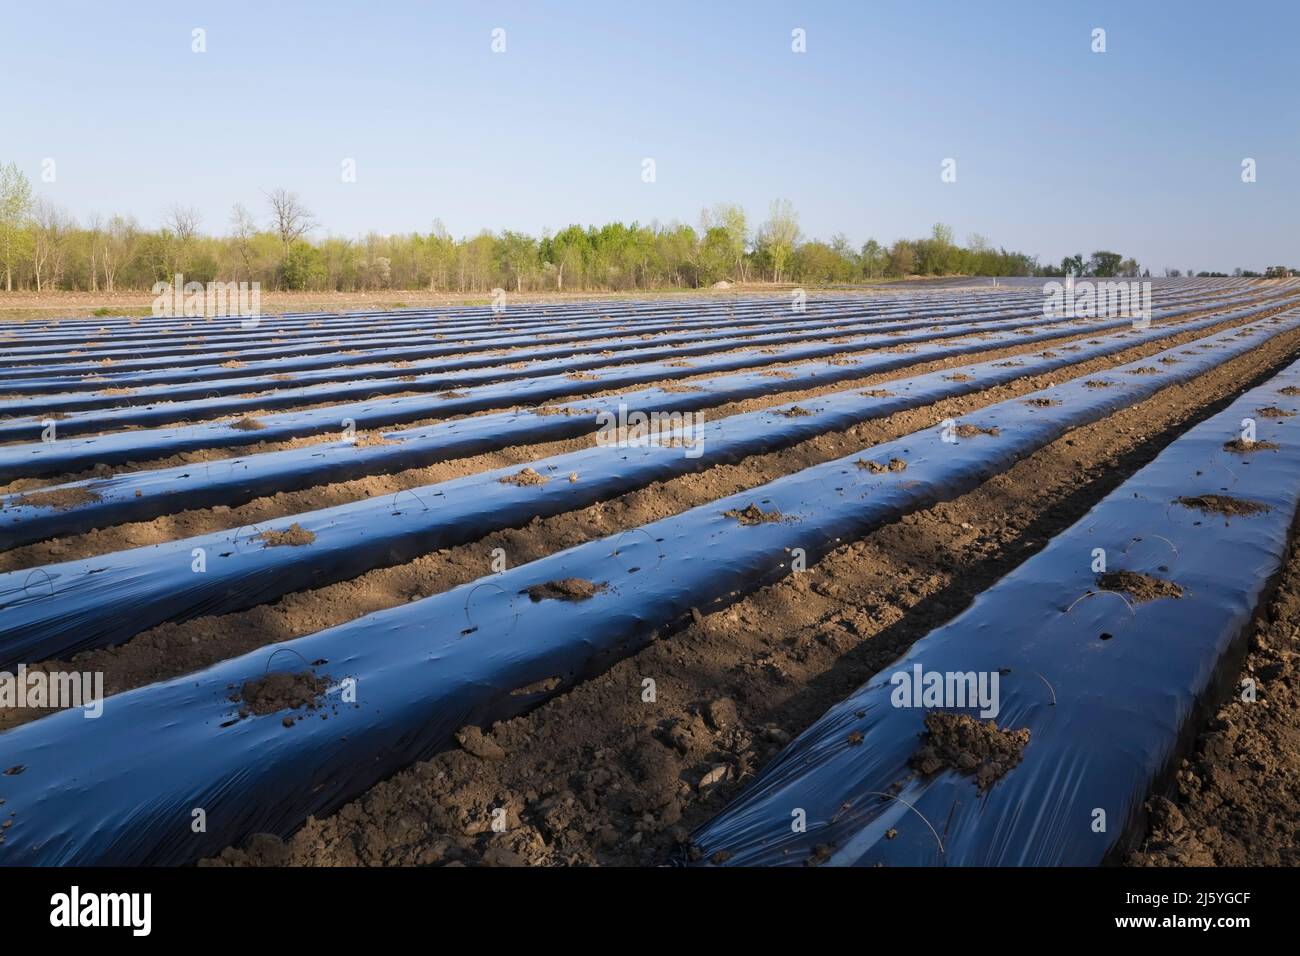 Agricultural field covered with protective sheeting to prevent frost damage to newly planted crops in spring. Stock Photo